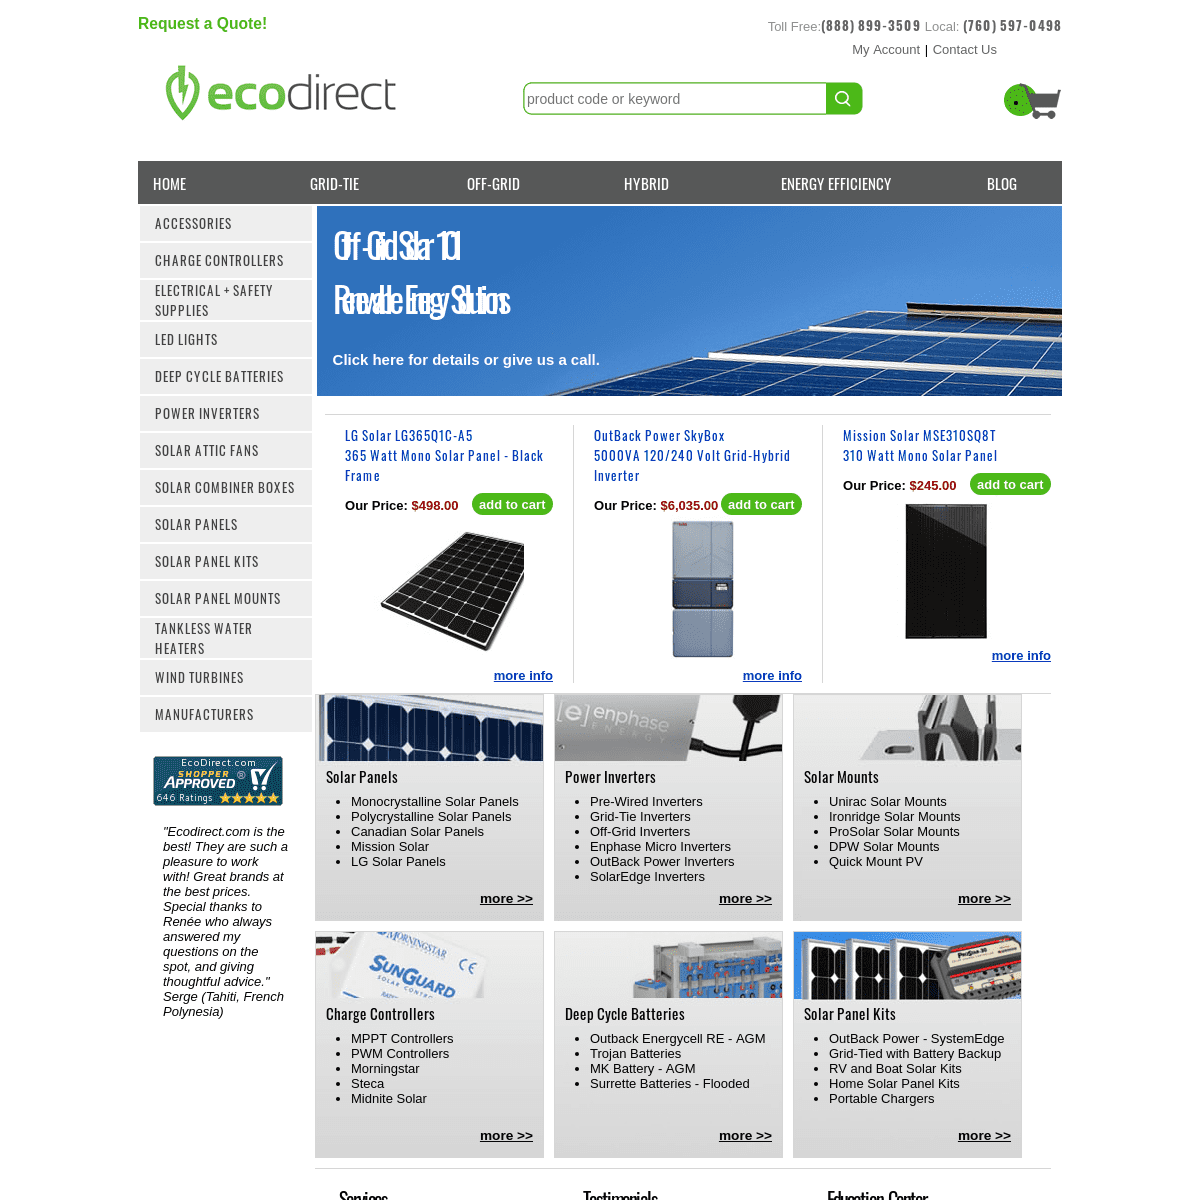 Solar Panels for Your Home & Energy Efficient Products - EcoDirect.com